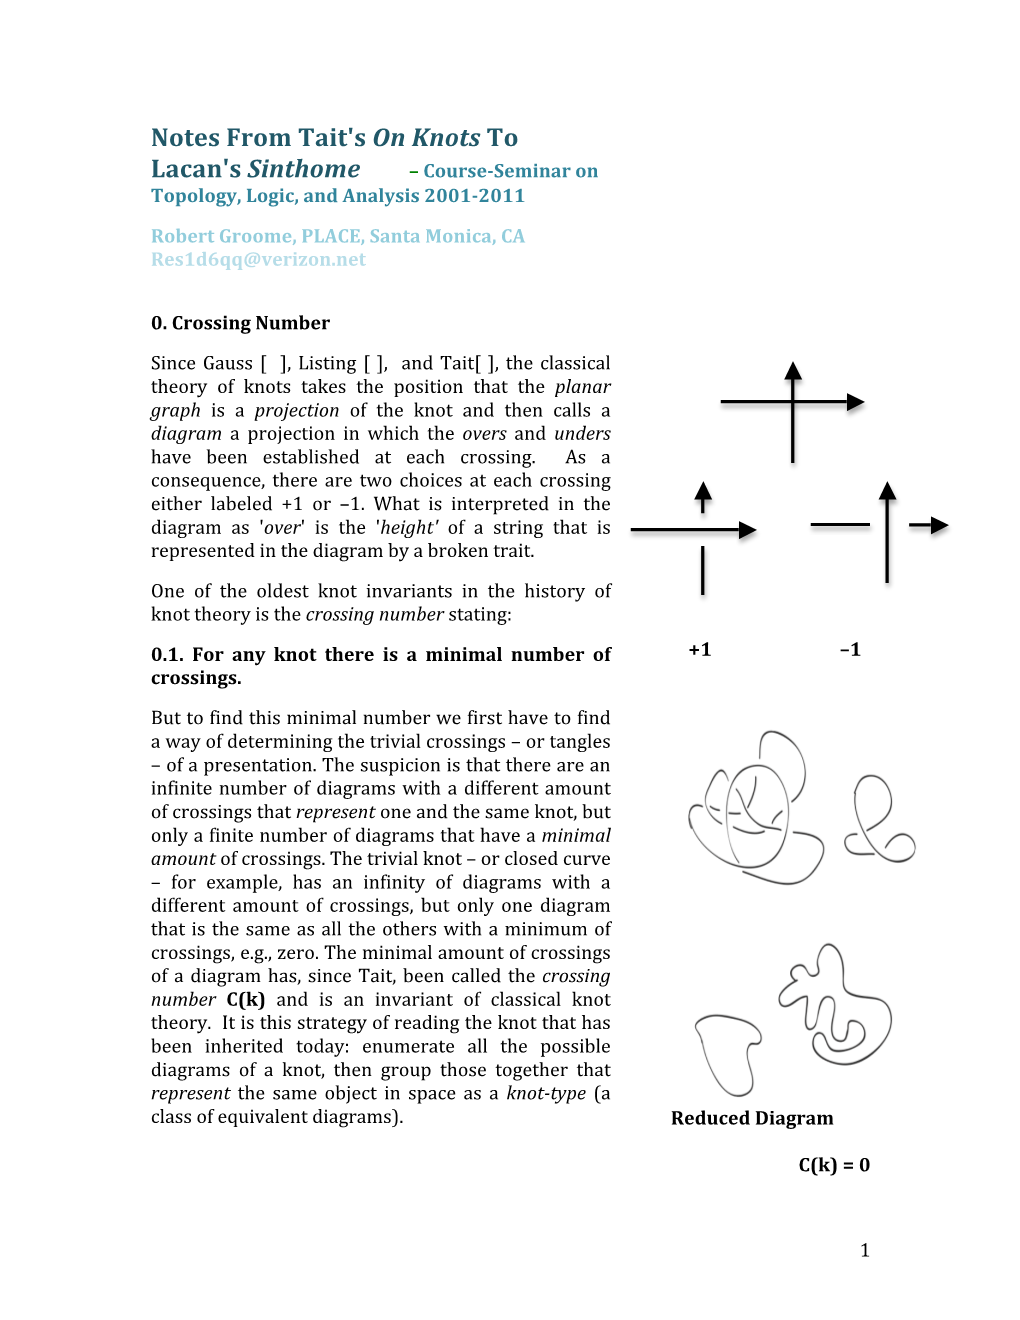 Notes from Tait's on Knots to Lacan's Sinthome – Course-Seminar On